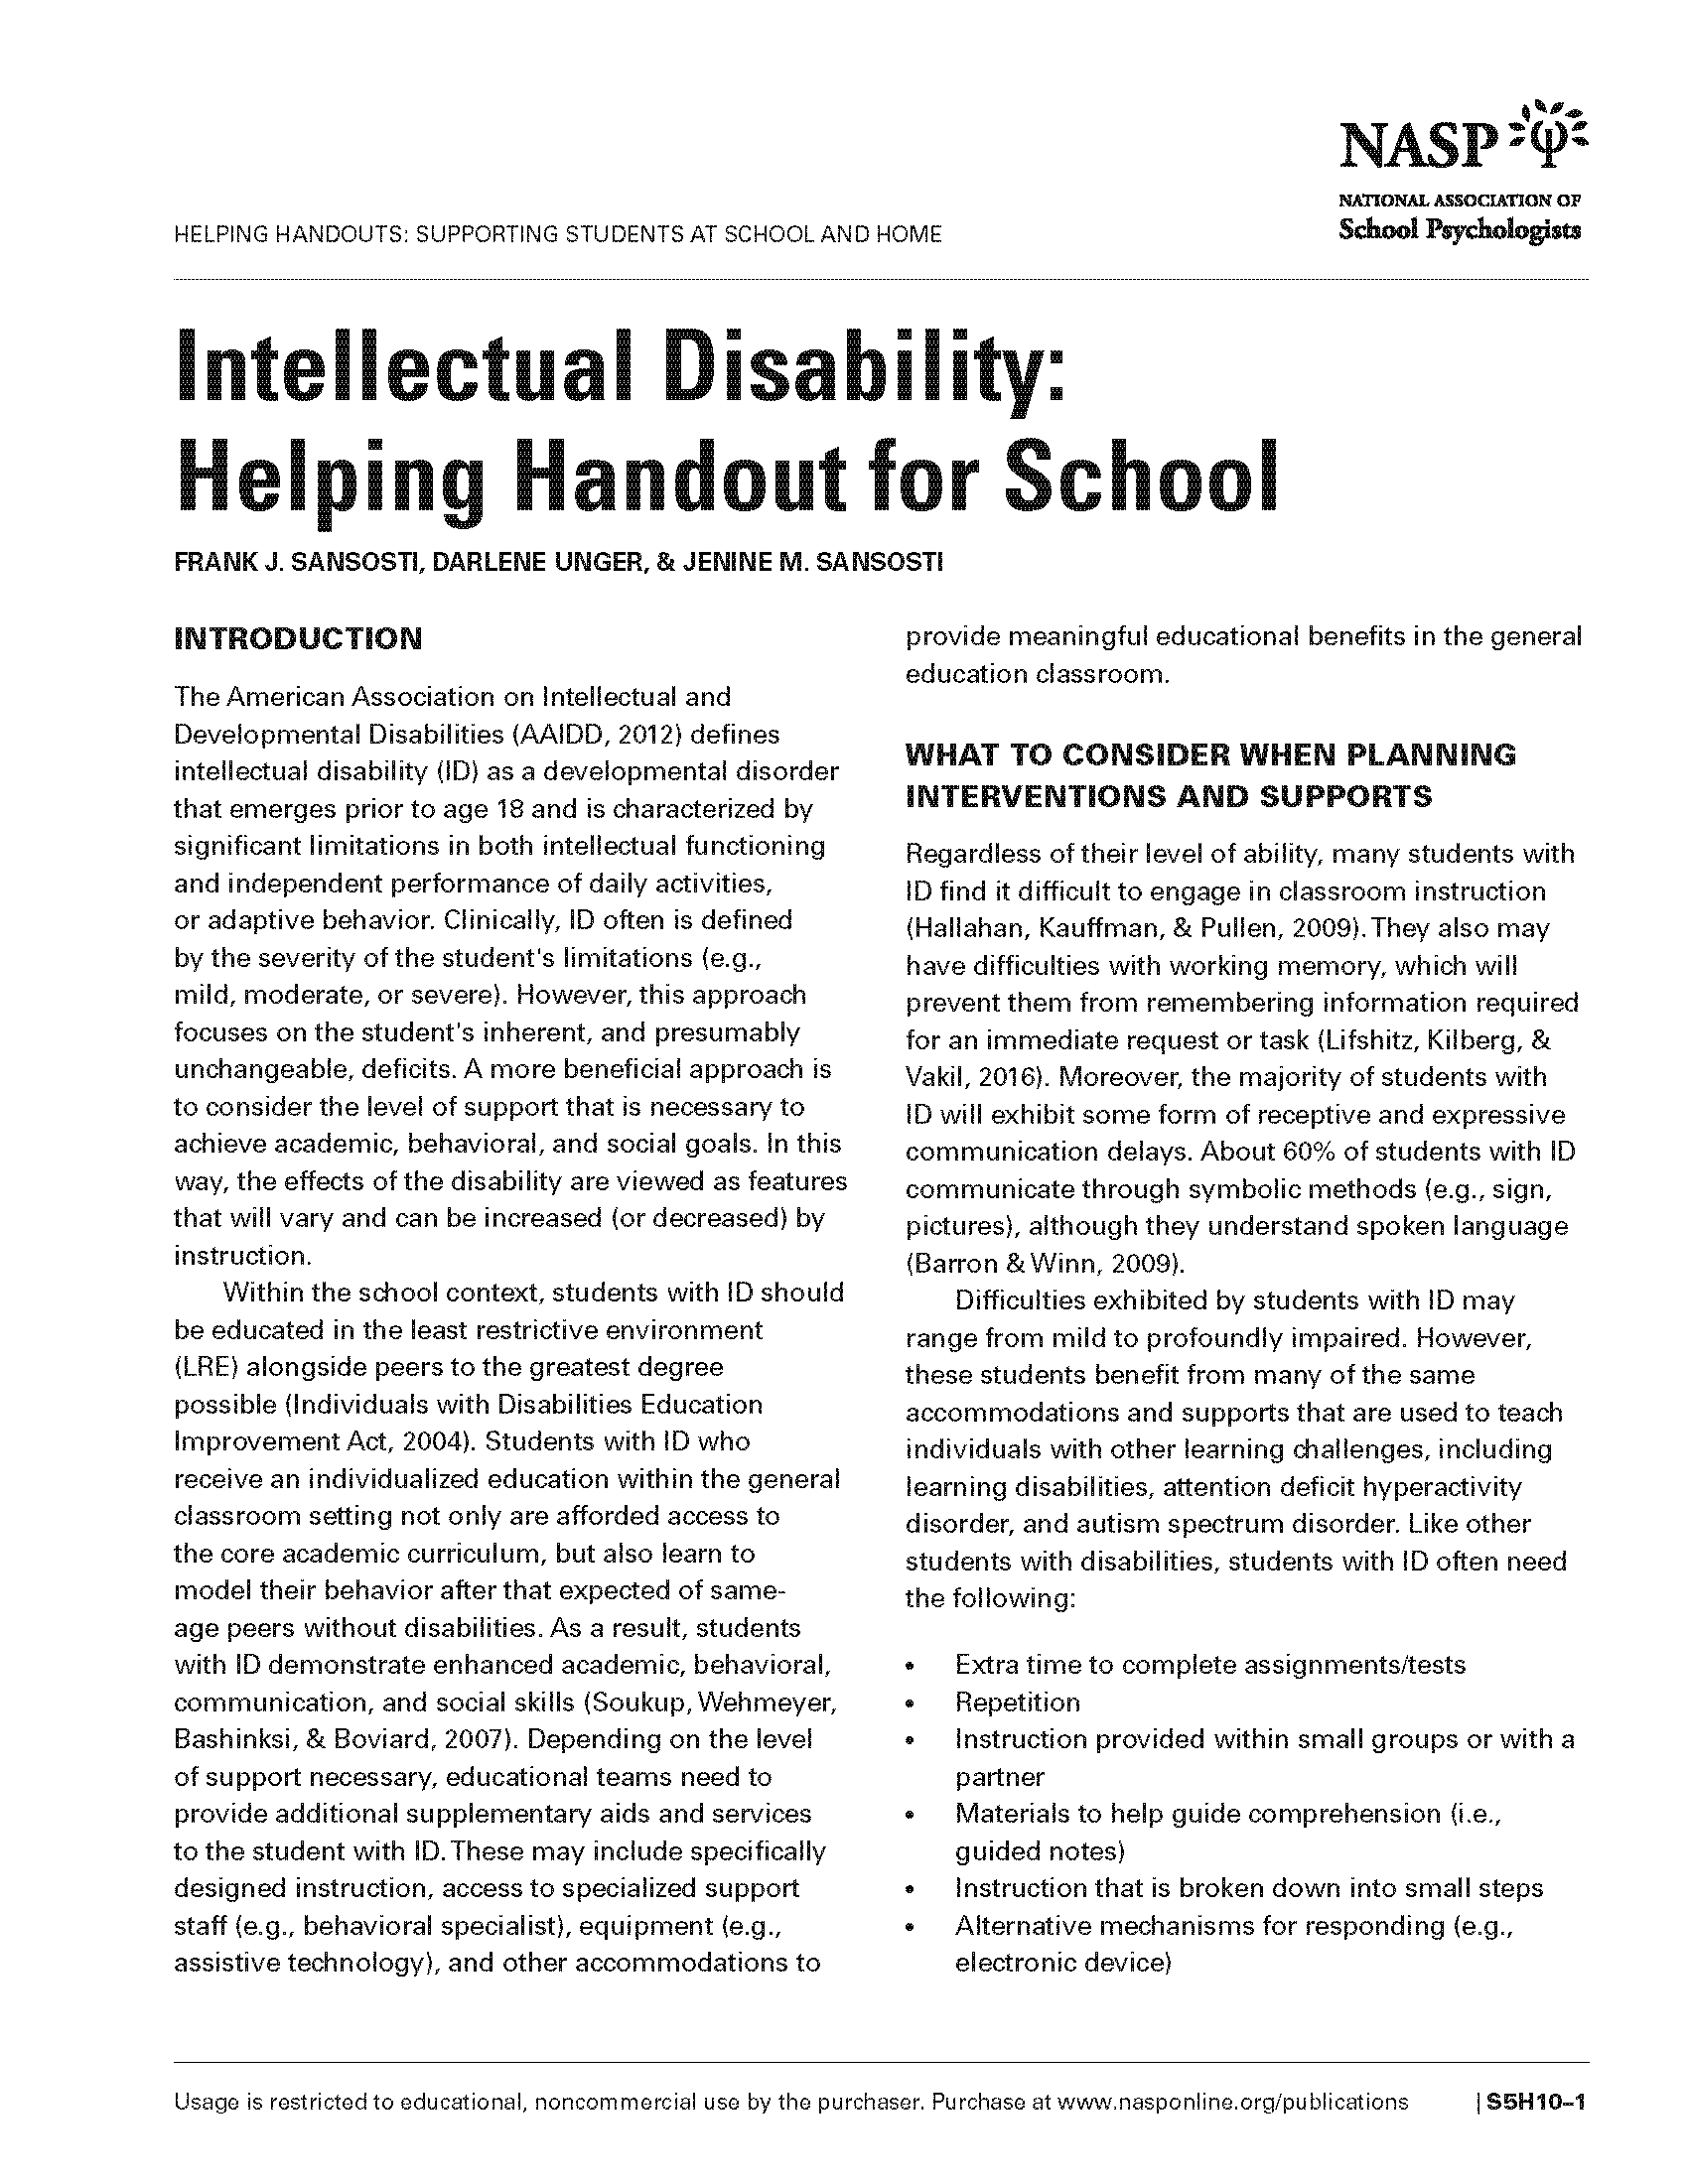 Intellectual Disability: Helping Handout for School